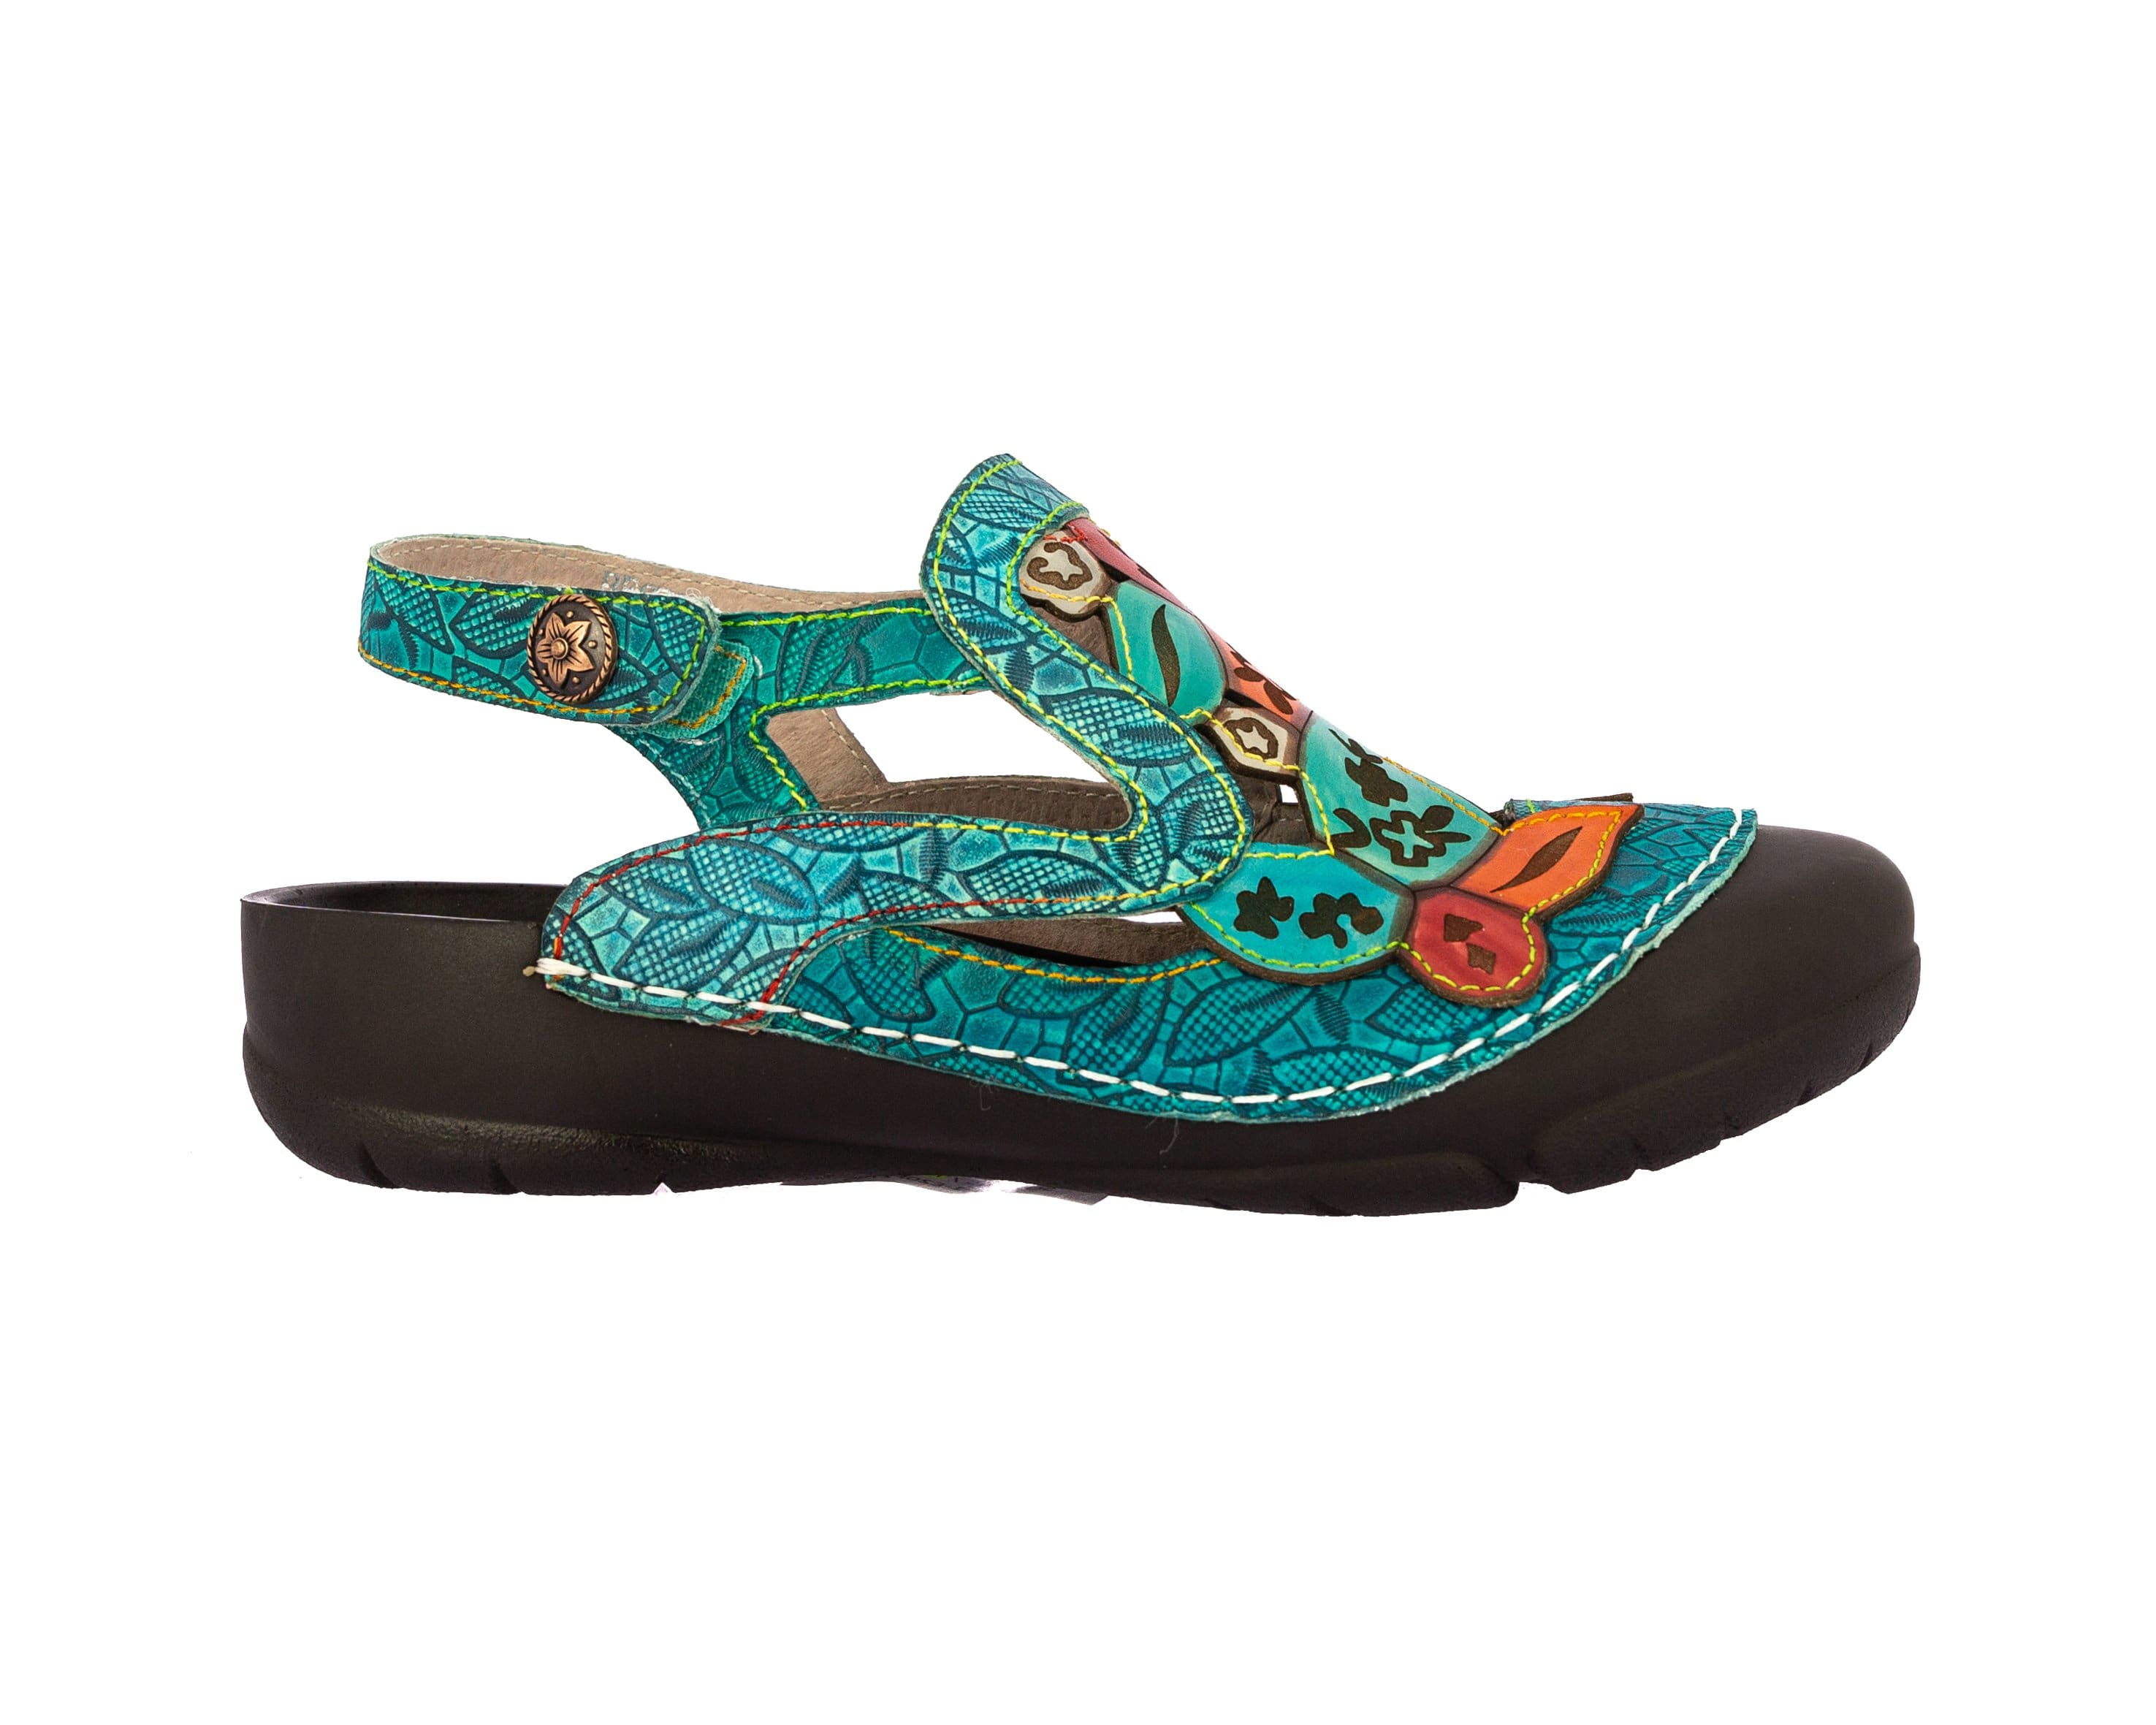 Schuhe BECZIERSO 01 - 35 / TURQUOISE - Sandale